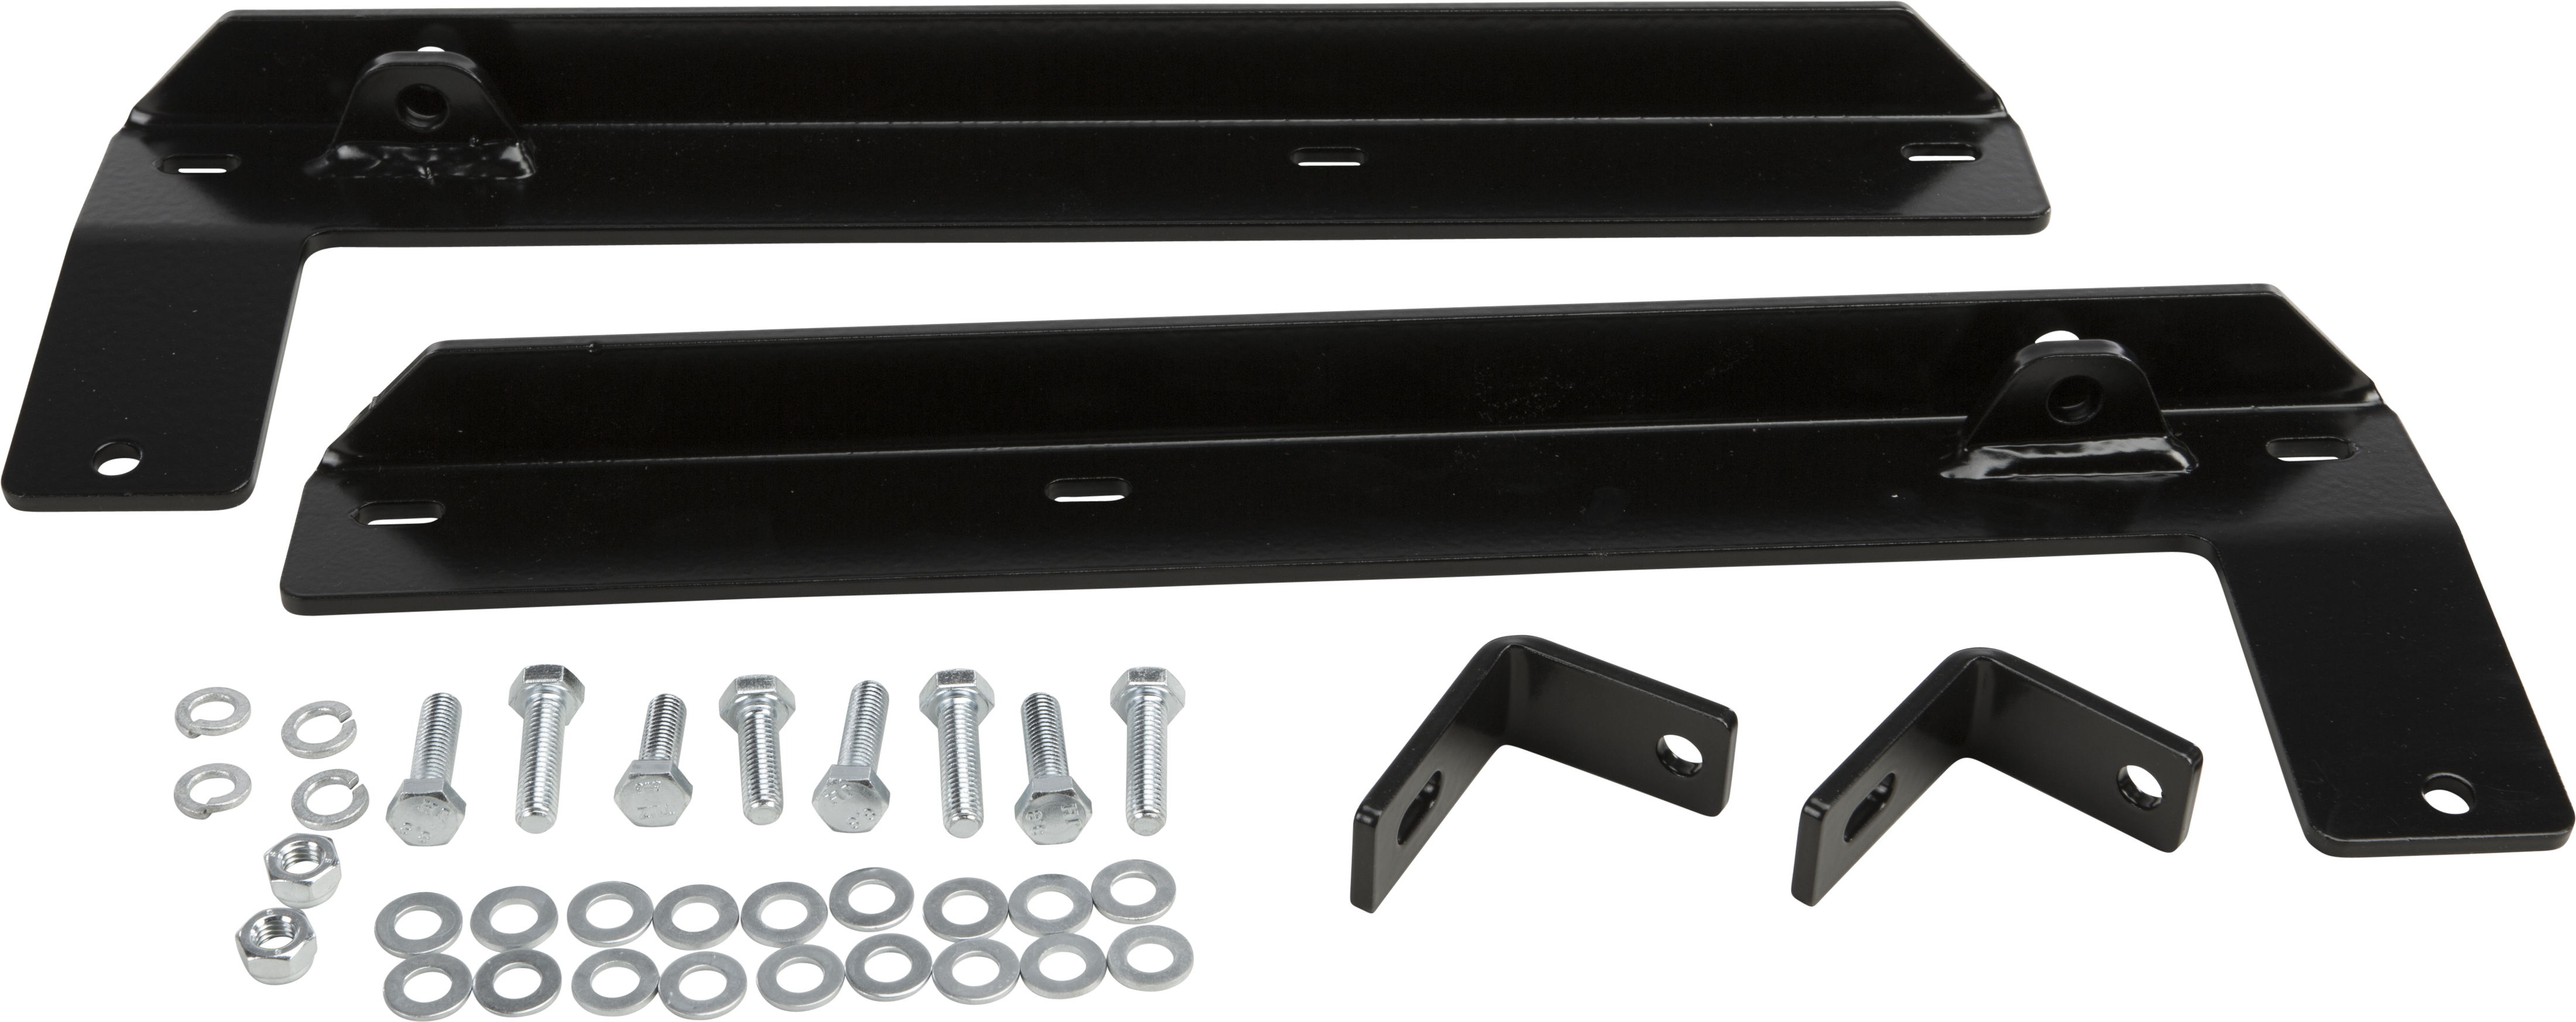 ATV Plow Mid Mount Kit - For 99-05 Bombardier Quest Traxter - Click Image to Close